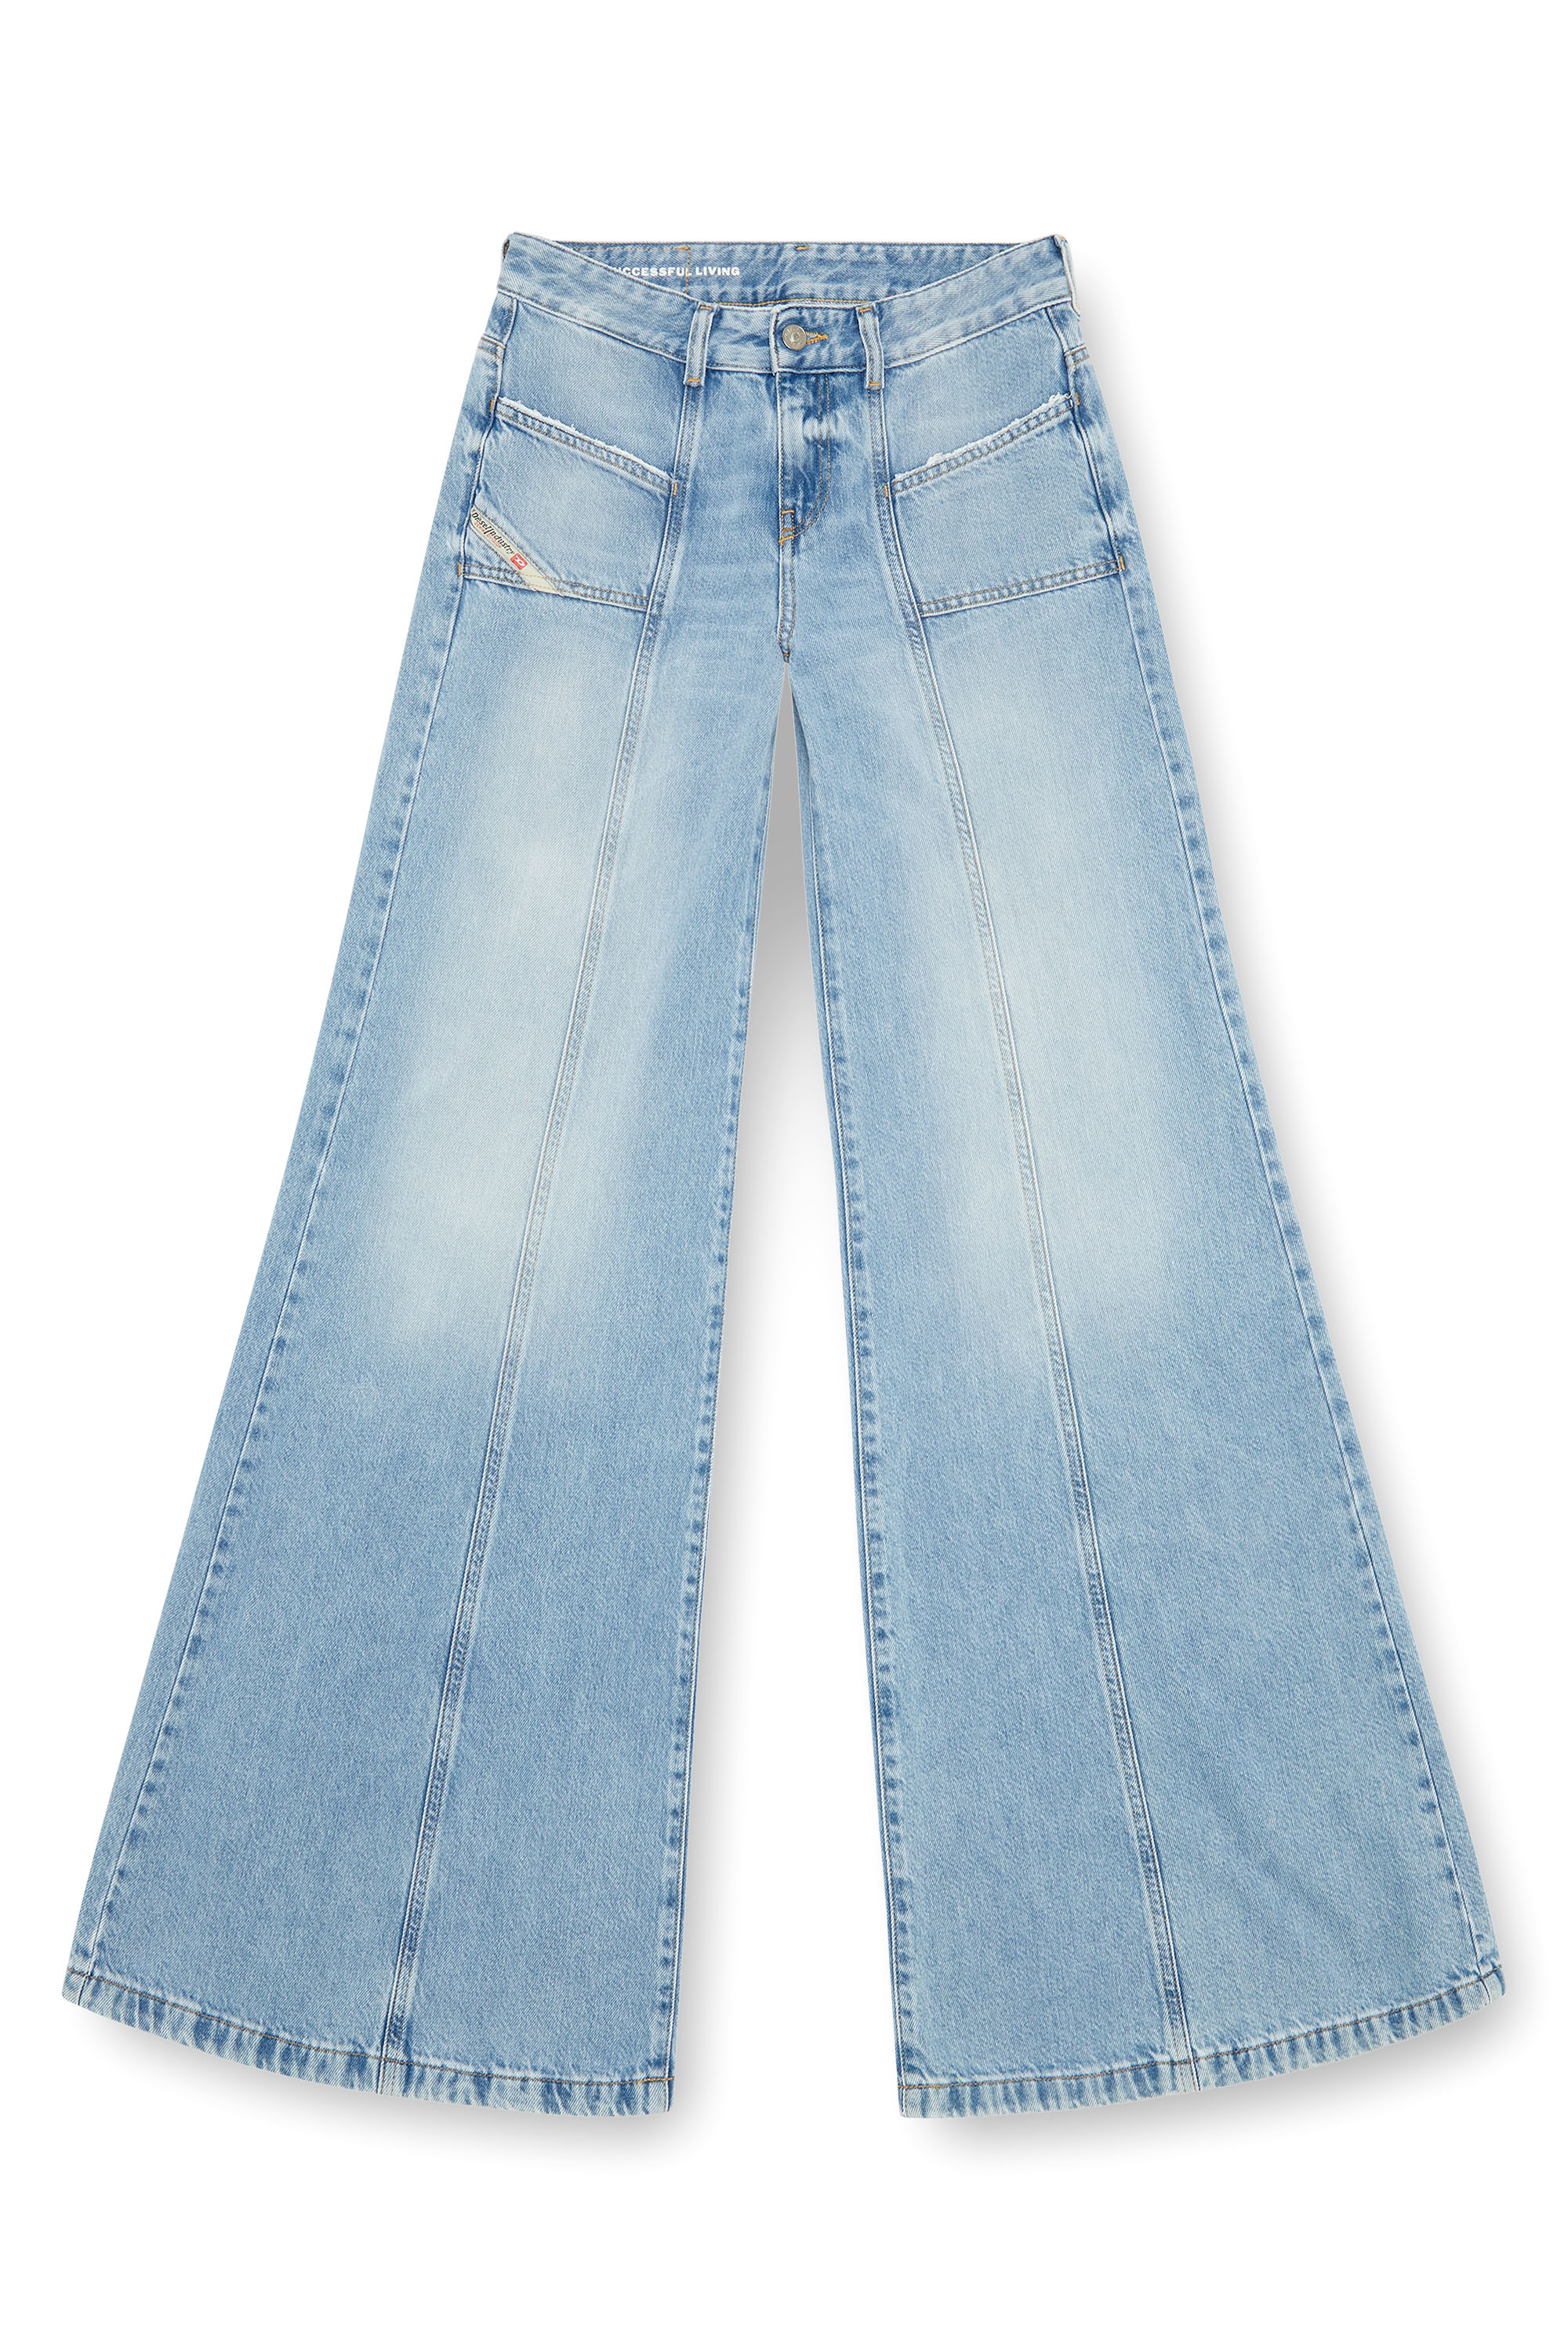 Diesel - Bootcut and Flare Jeans D-Akii 09J88, Mujer Bootcut y Flare Jeans - D-Akii in Azul marino - Image 3